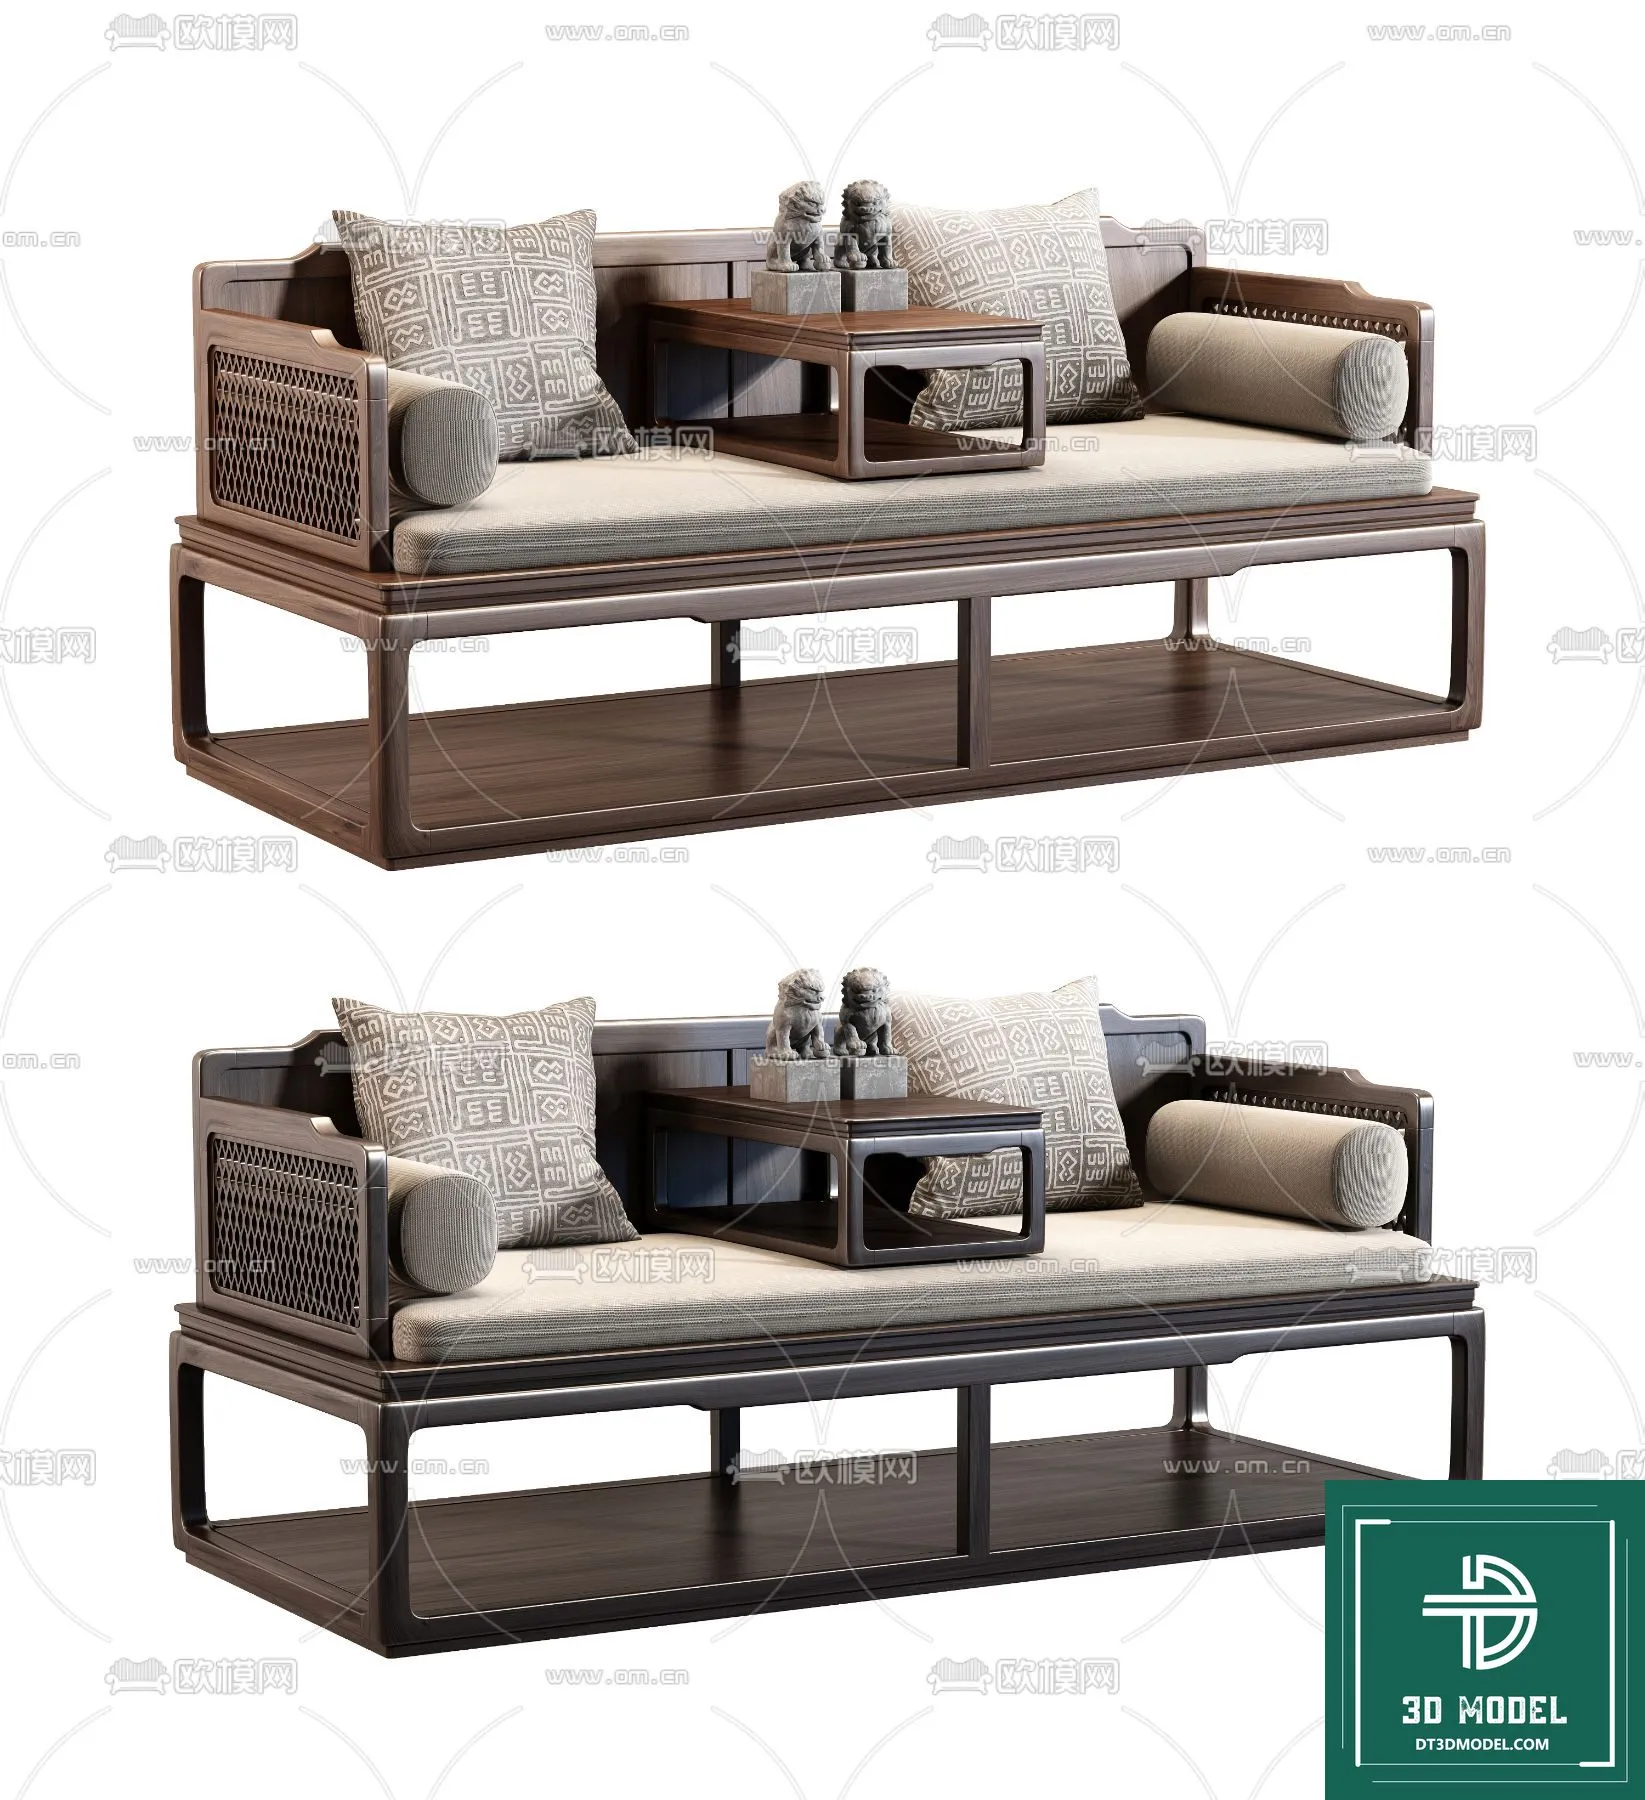 INDOCHINE STYLE – 3D MODELS – 511